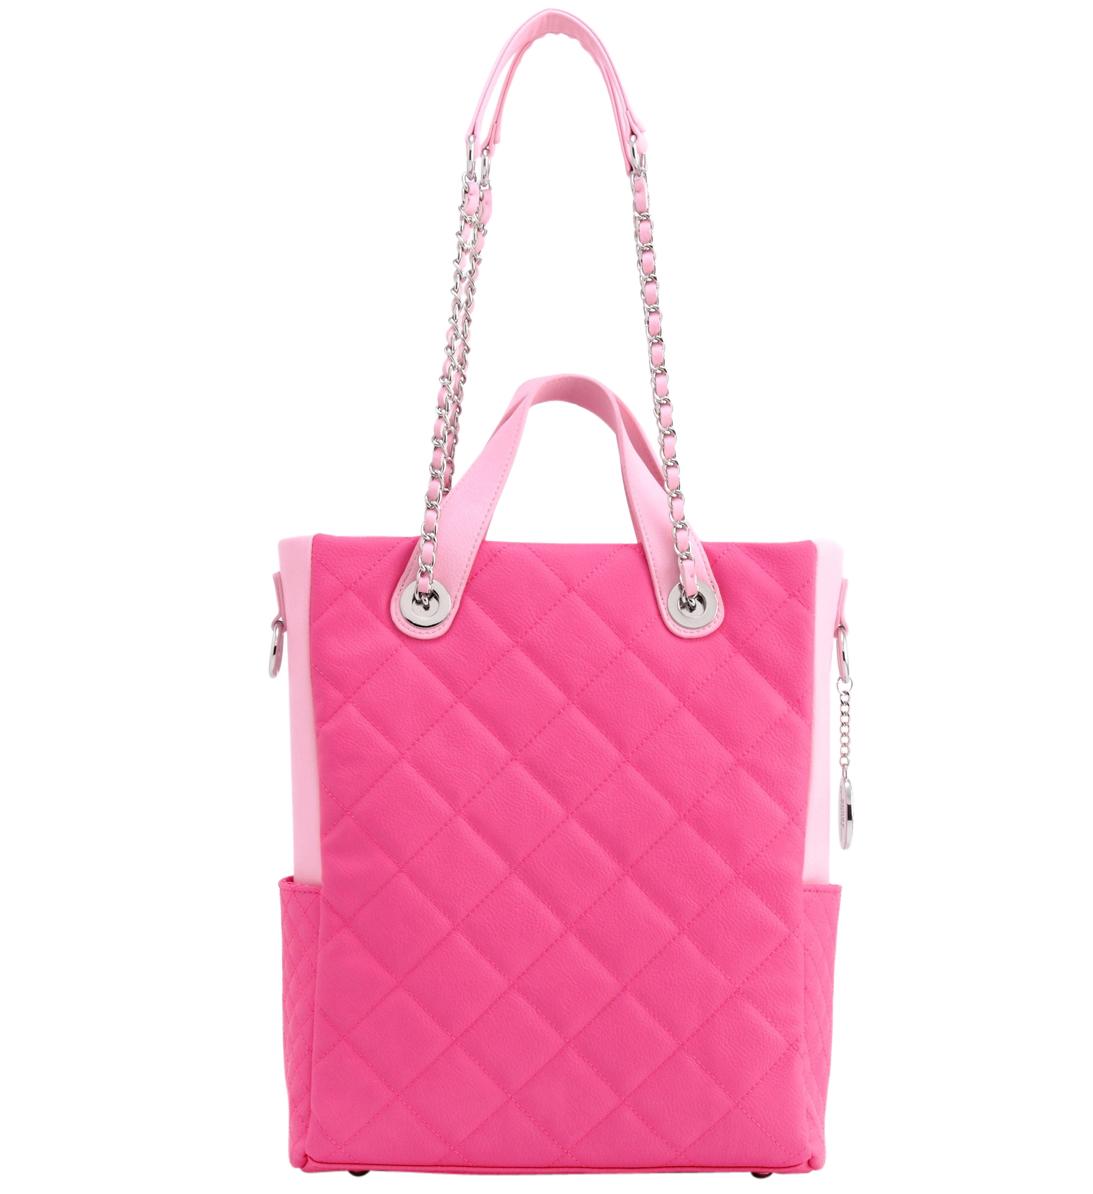 SCORE! Andrea Large Clear Designer Tote for School, Work, or Travel -  Fandango Pink and Light Pink